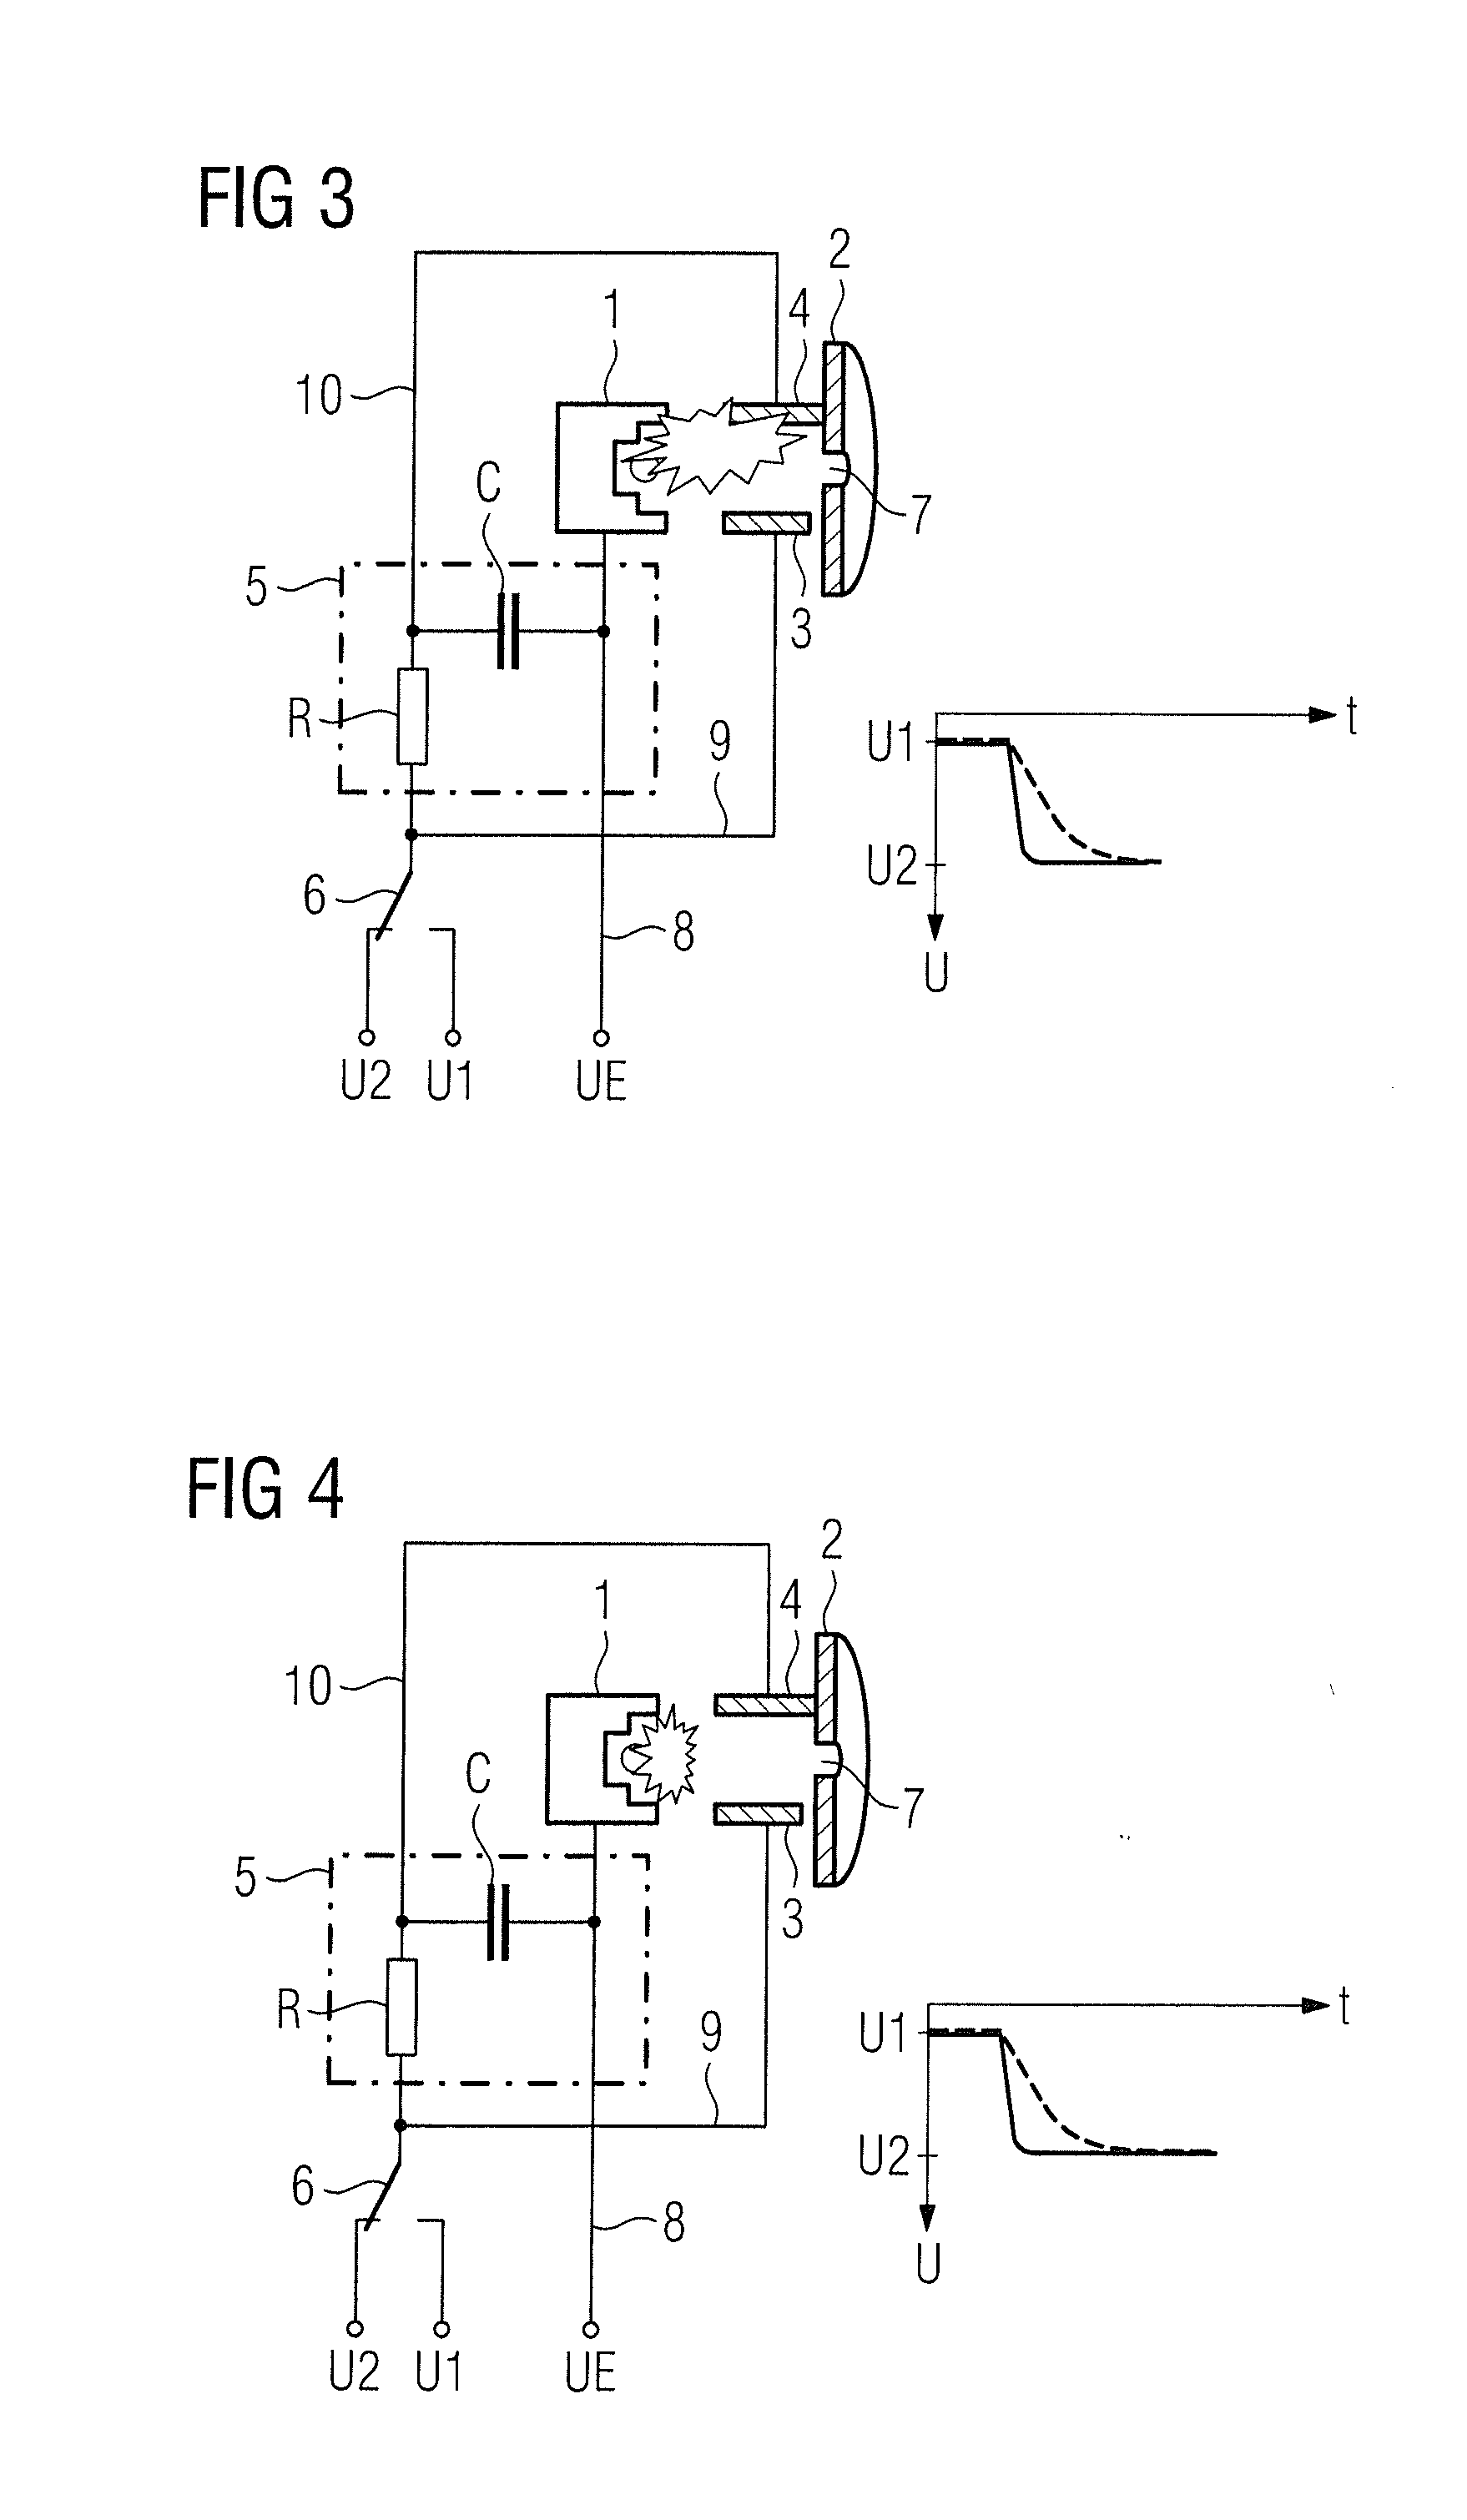 Device and method to control an electron beam for the generation of x-ray radiation, in an x-ray tube